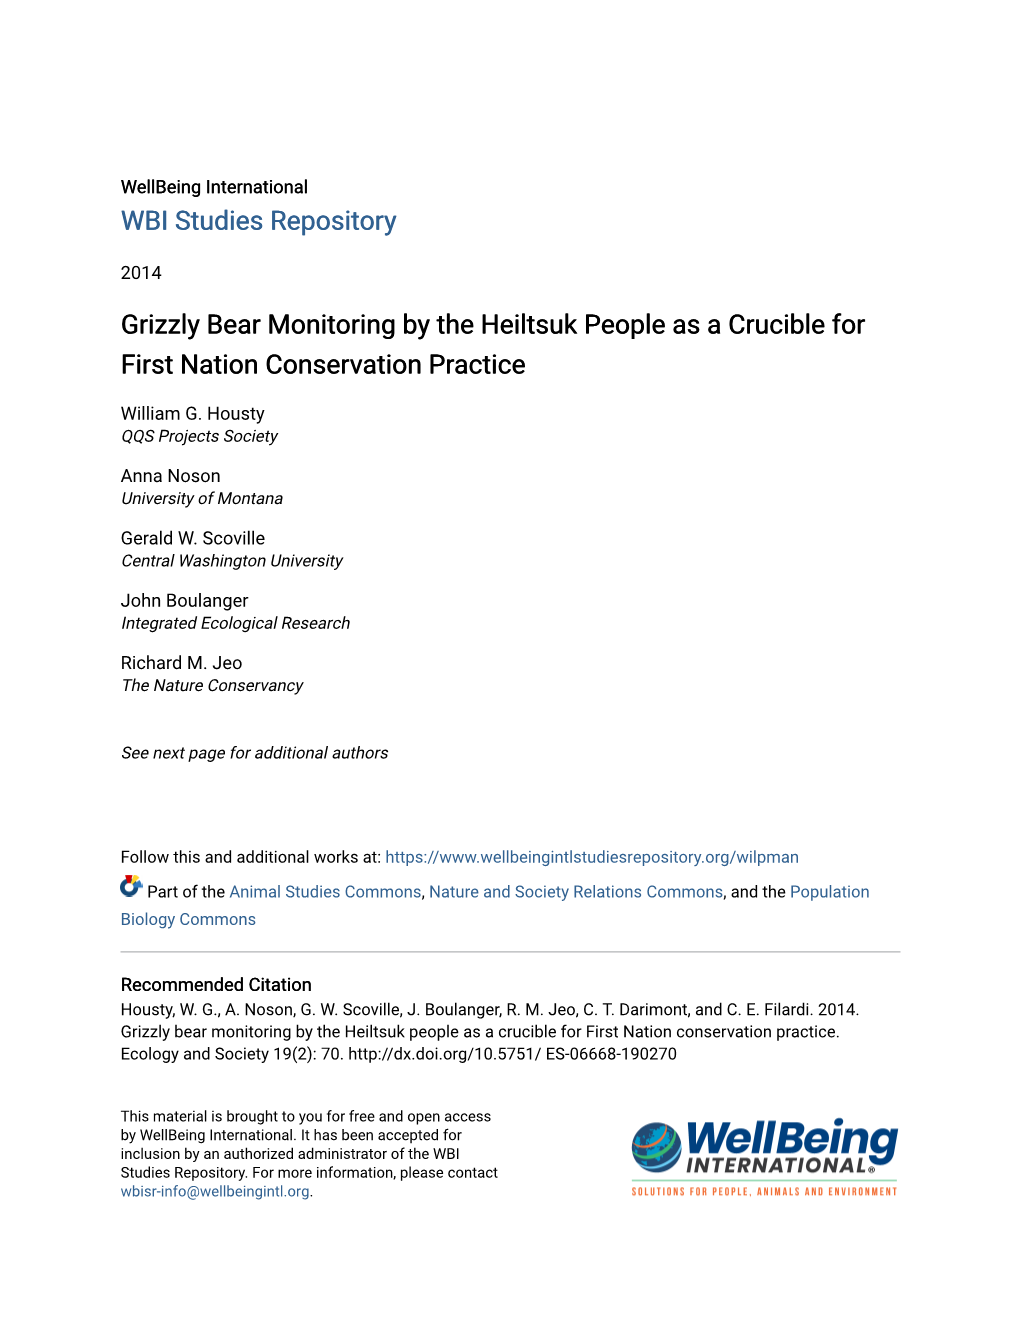 Grizzly Bear Monitoring by the Heiltsuk People As a Crucible for First Nation Conservation Practice